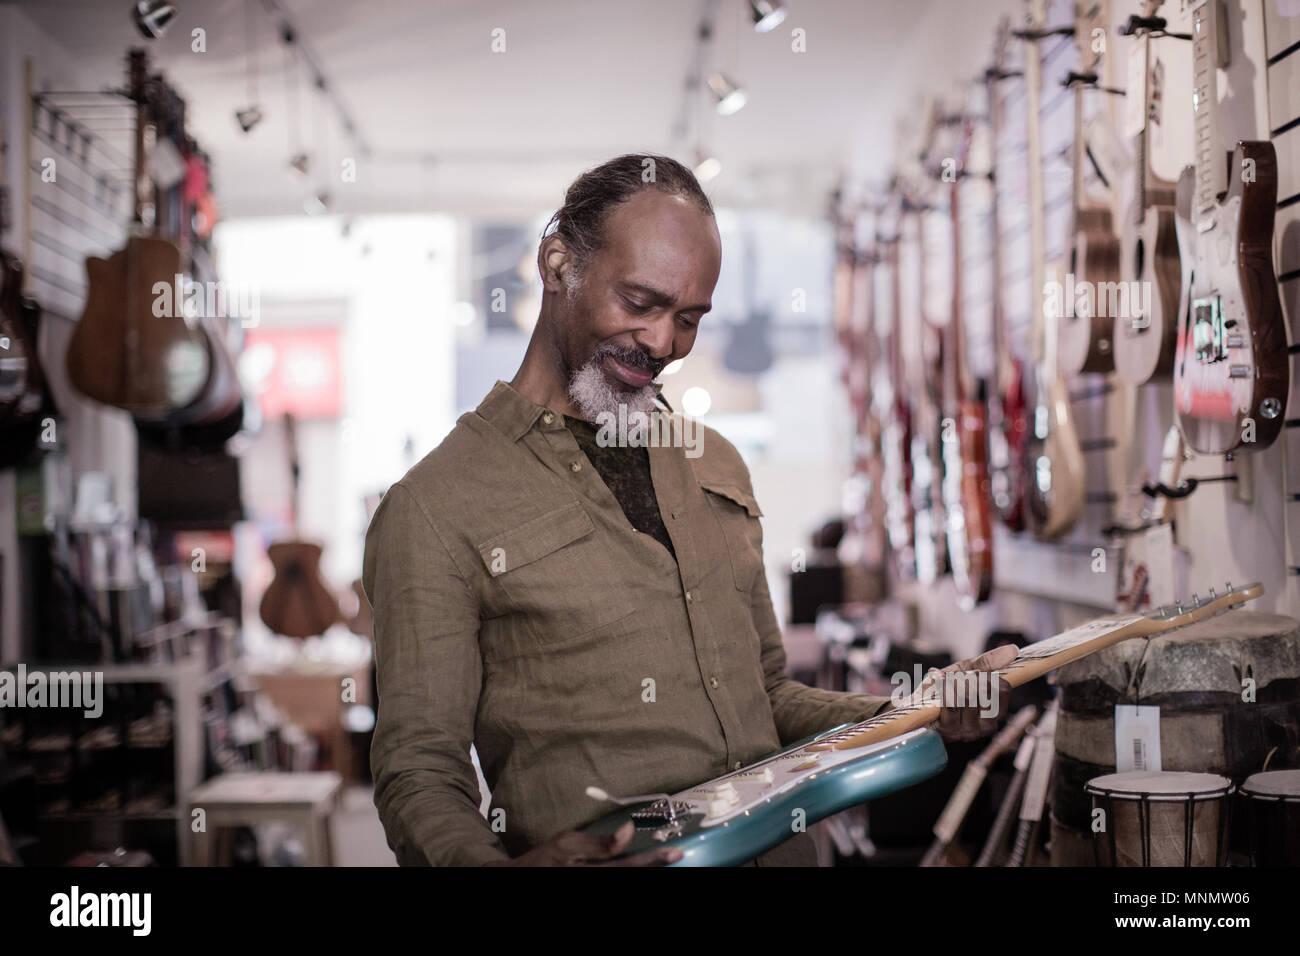 Senior male shopping in a guitar store Stock Photo